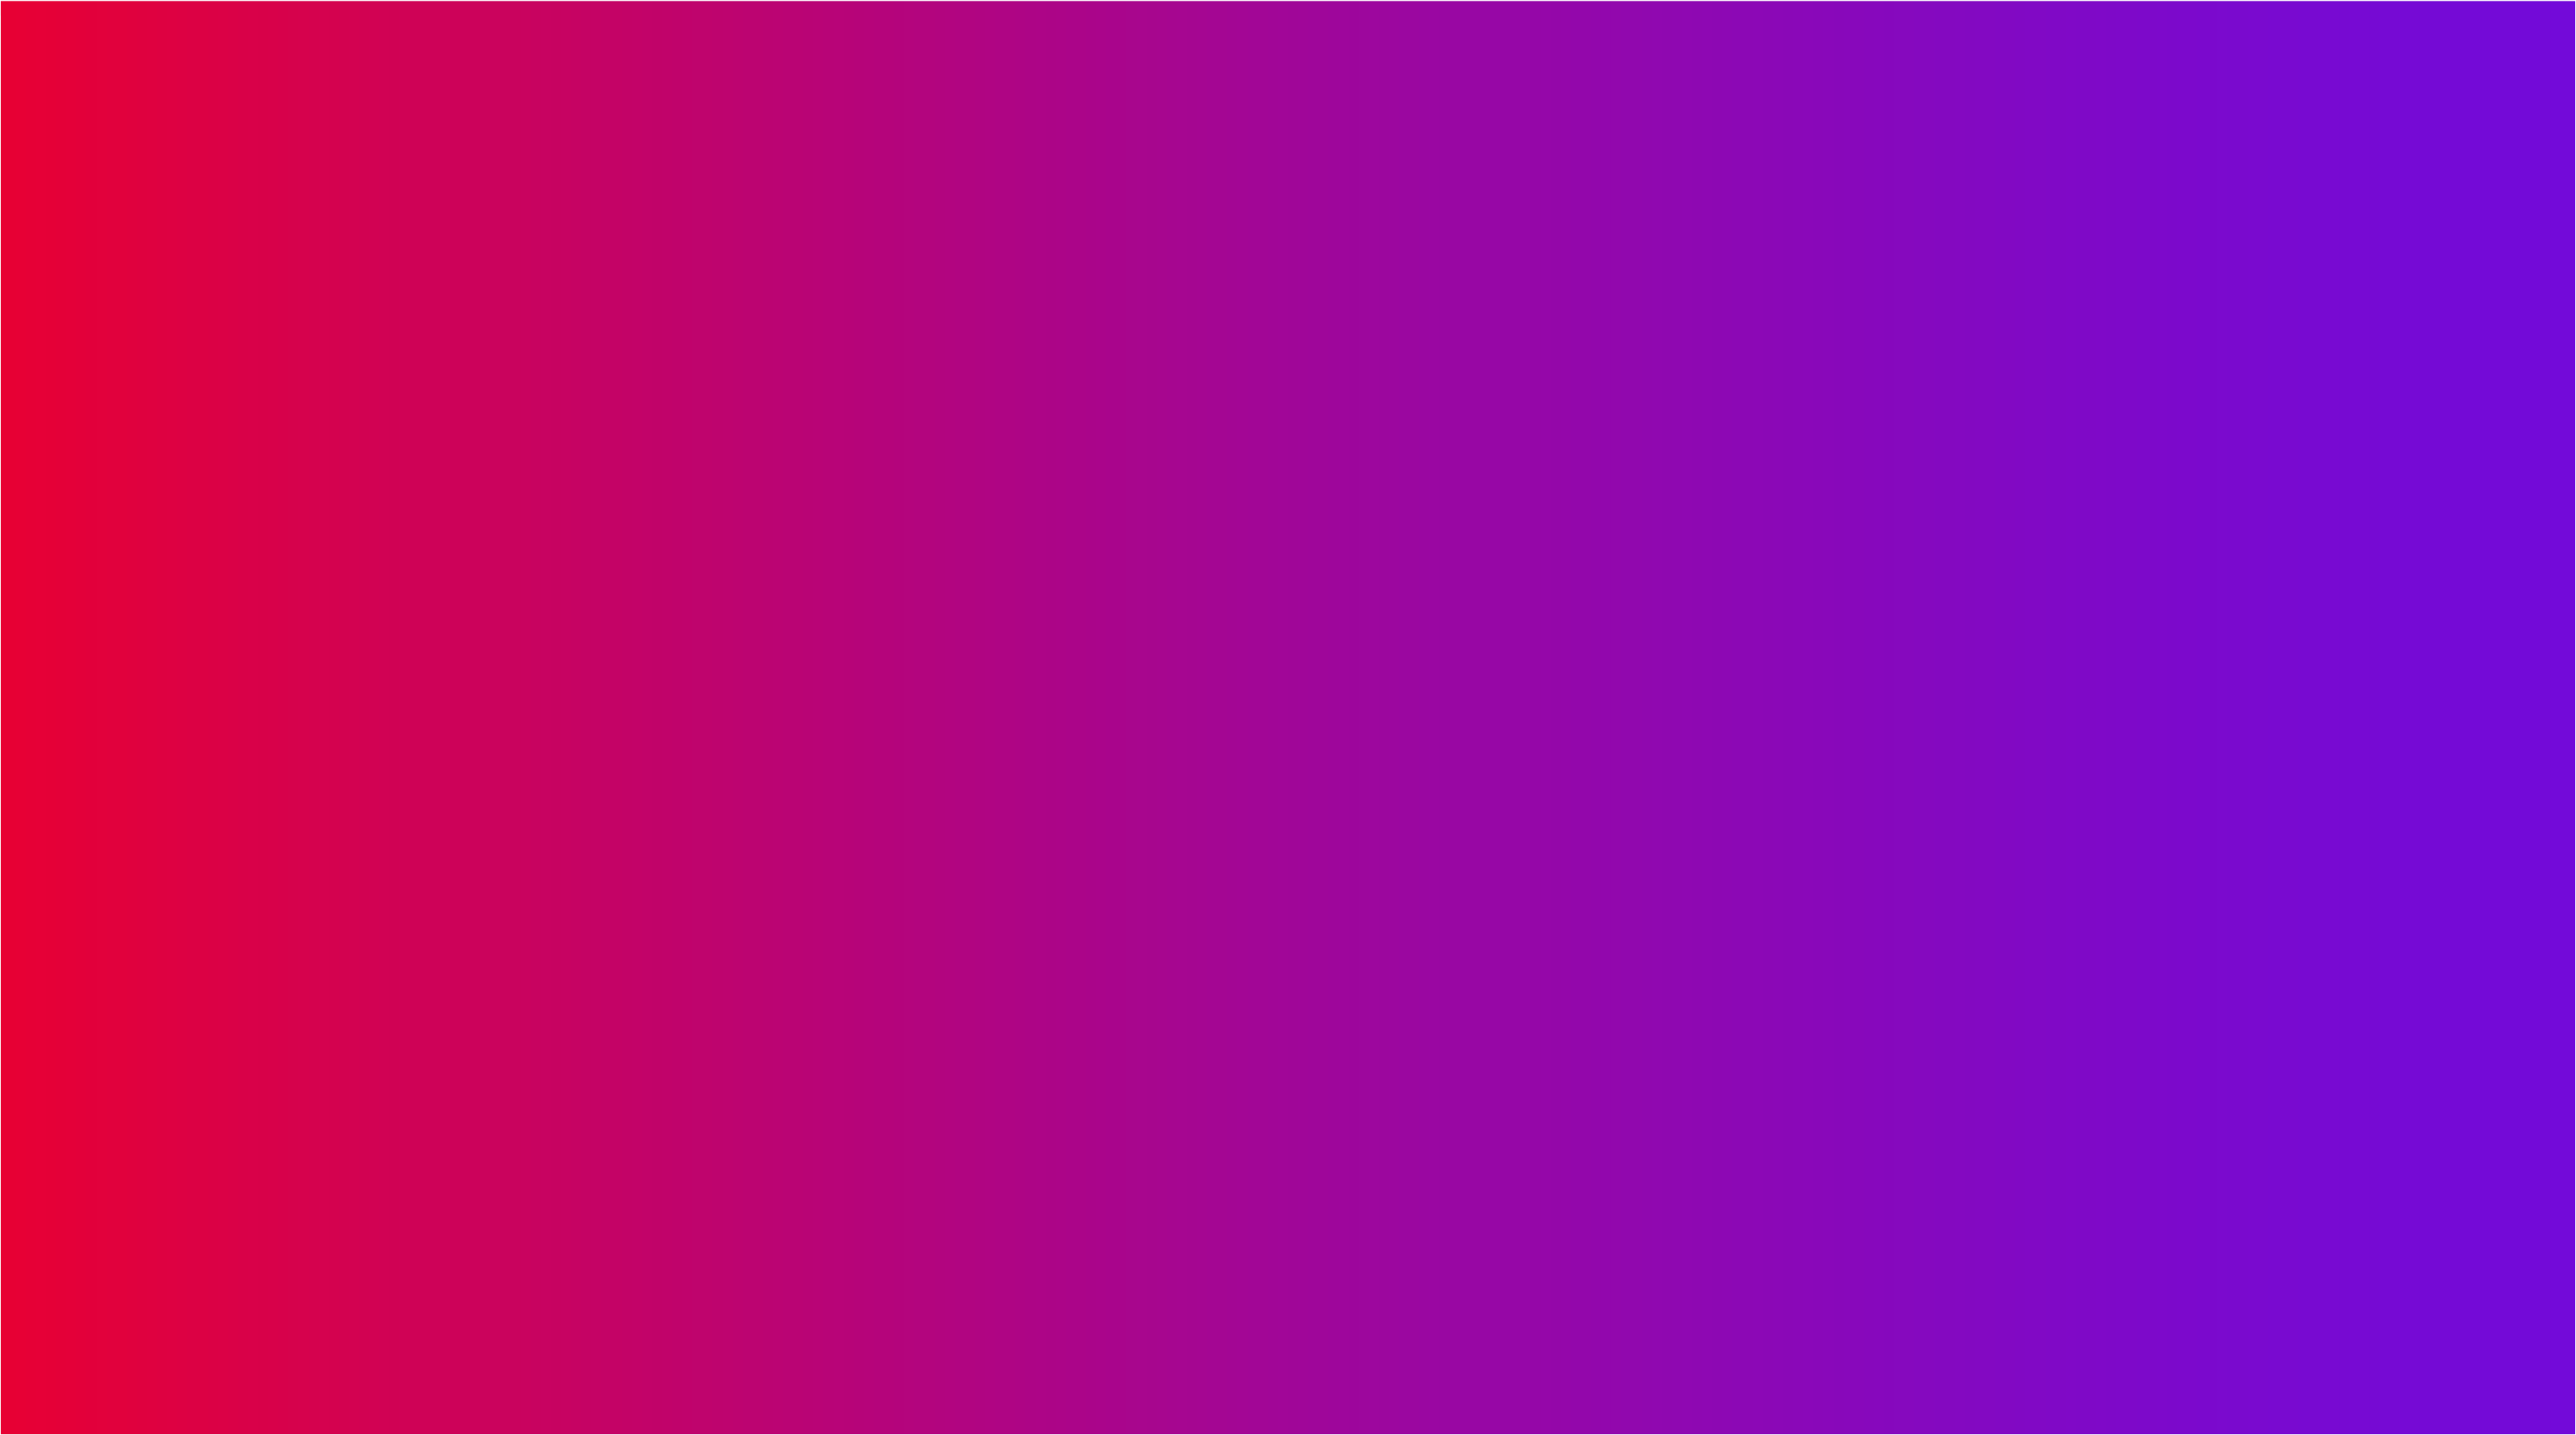 Red to purple to gradient